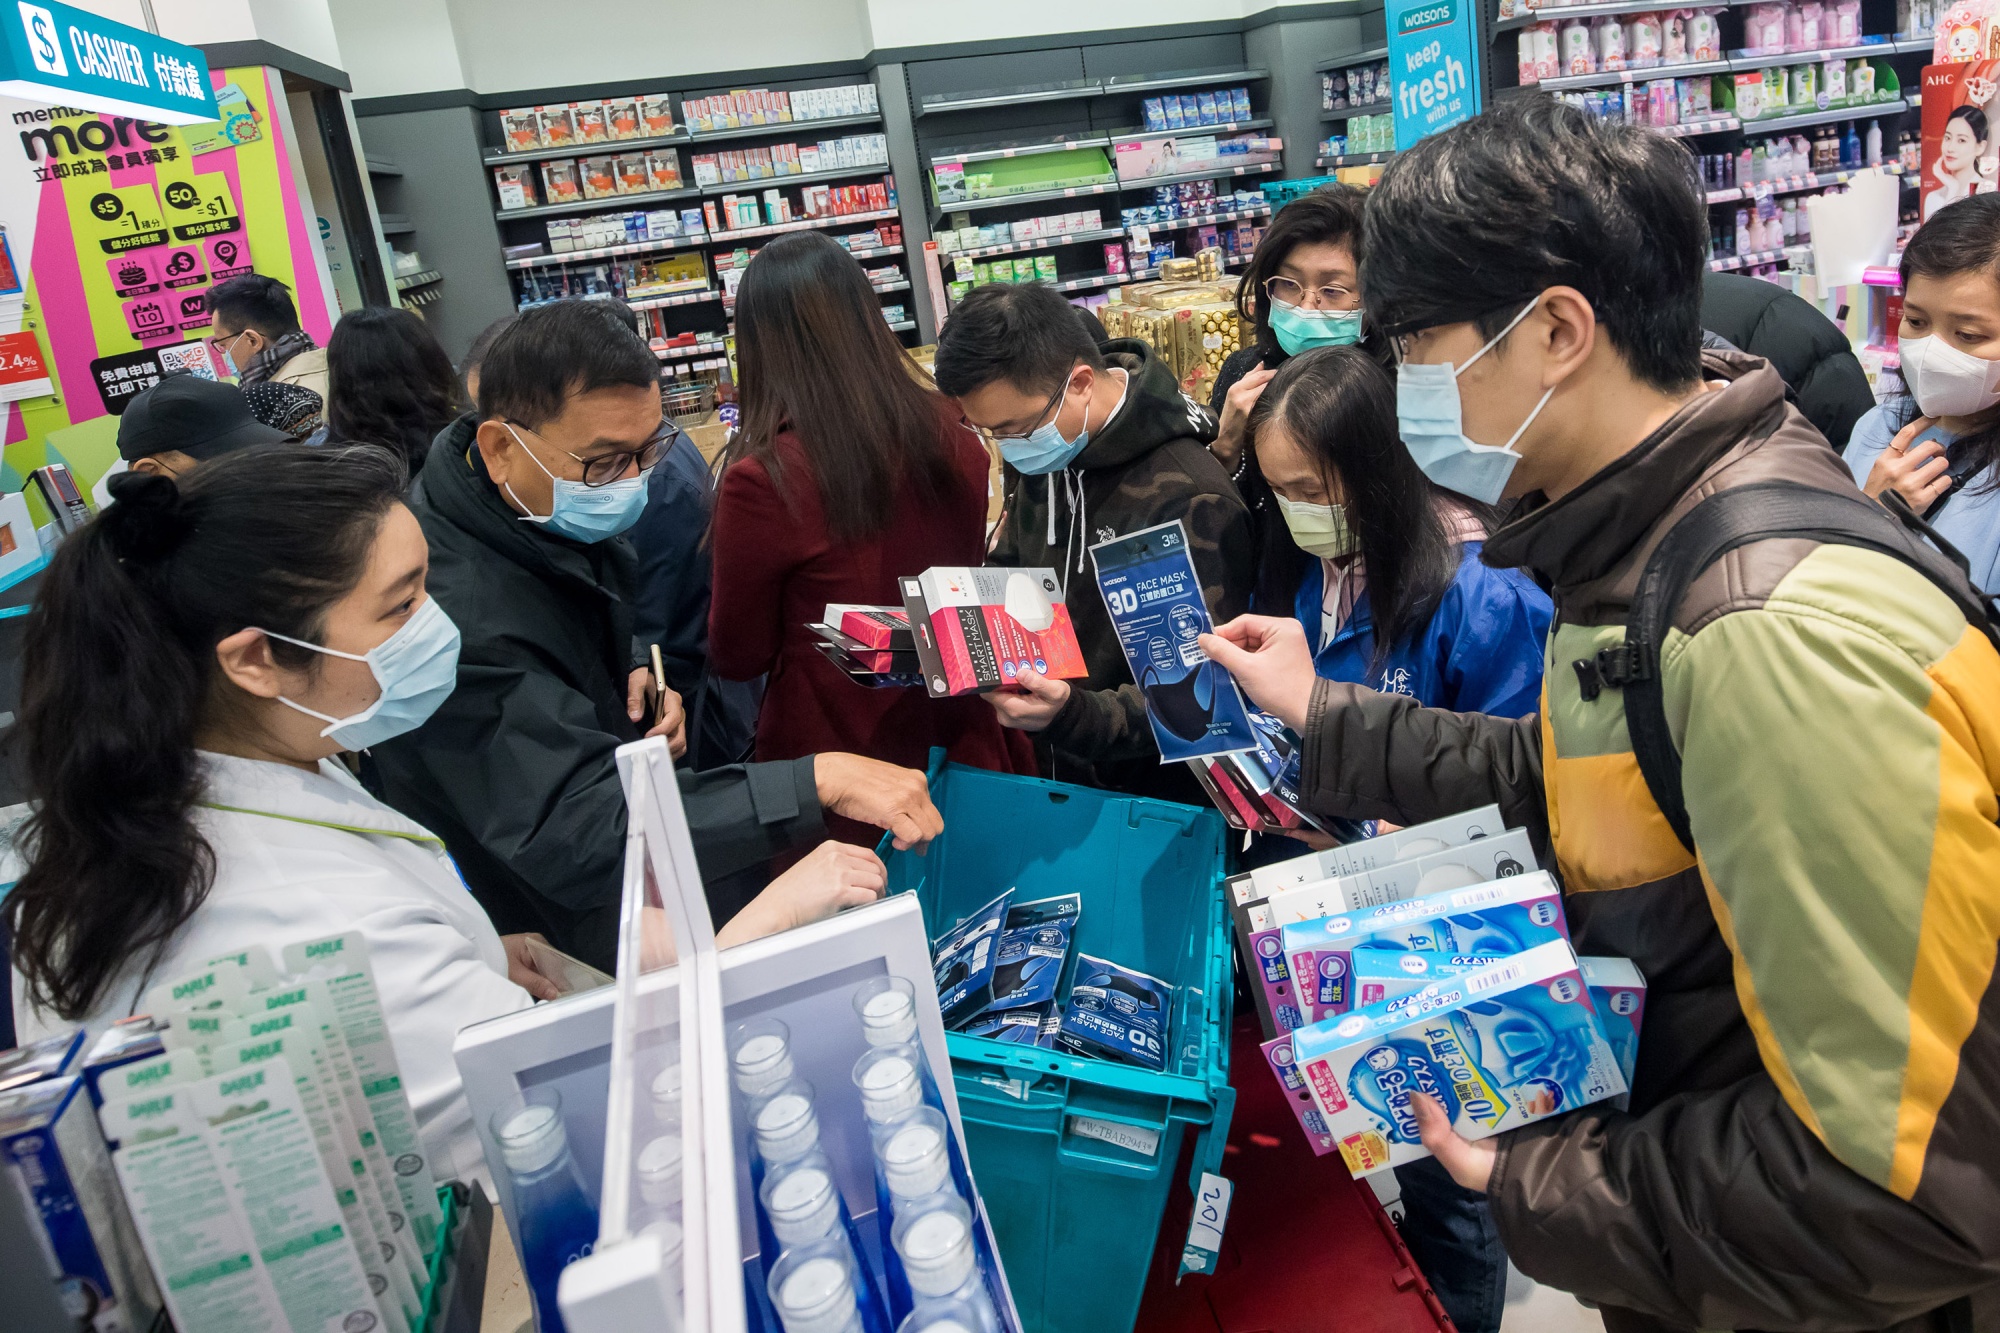 People wait in line to purchase protective masks at a Watsons store in Hong Kong.